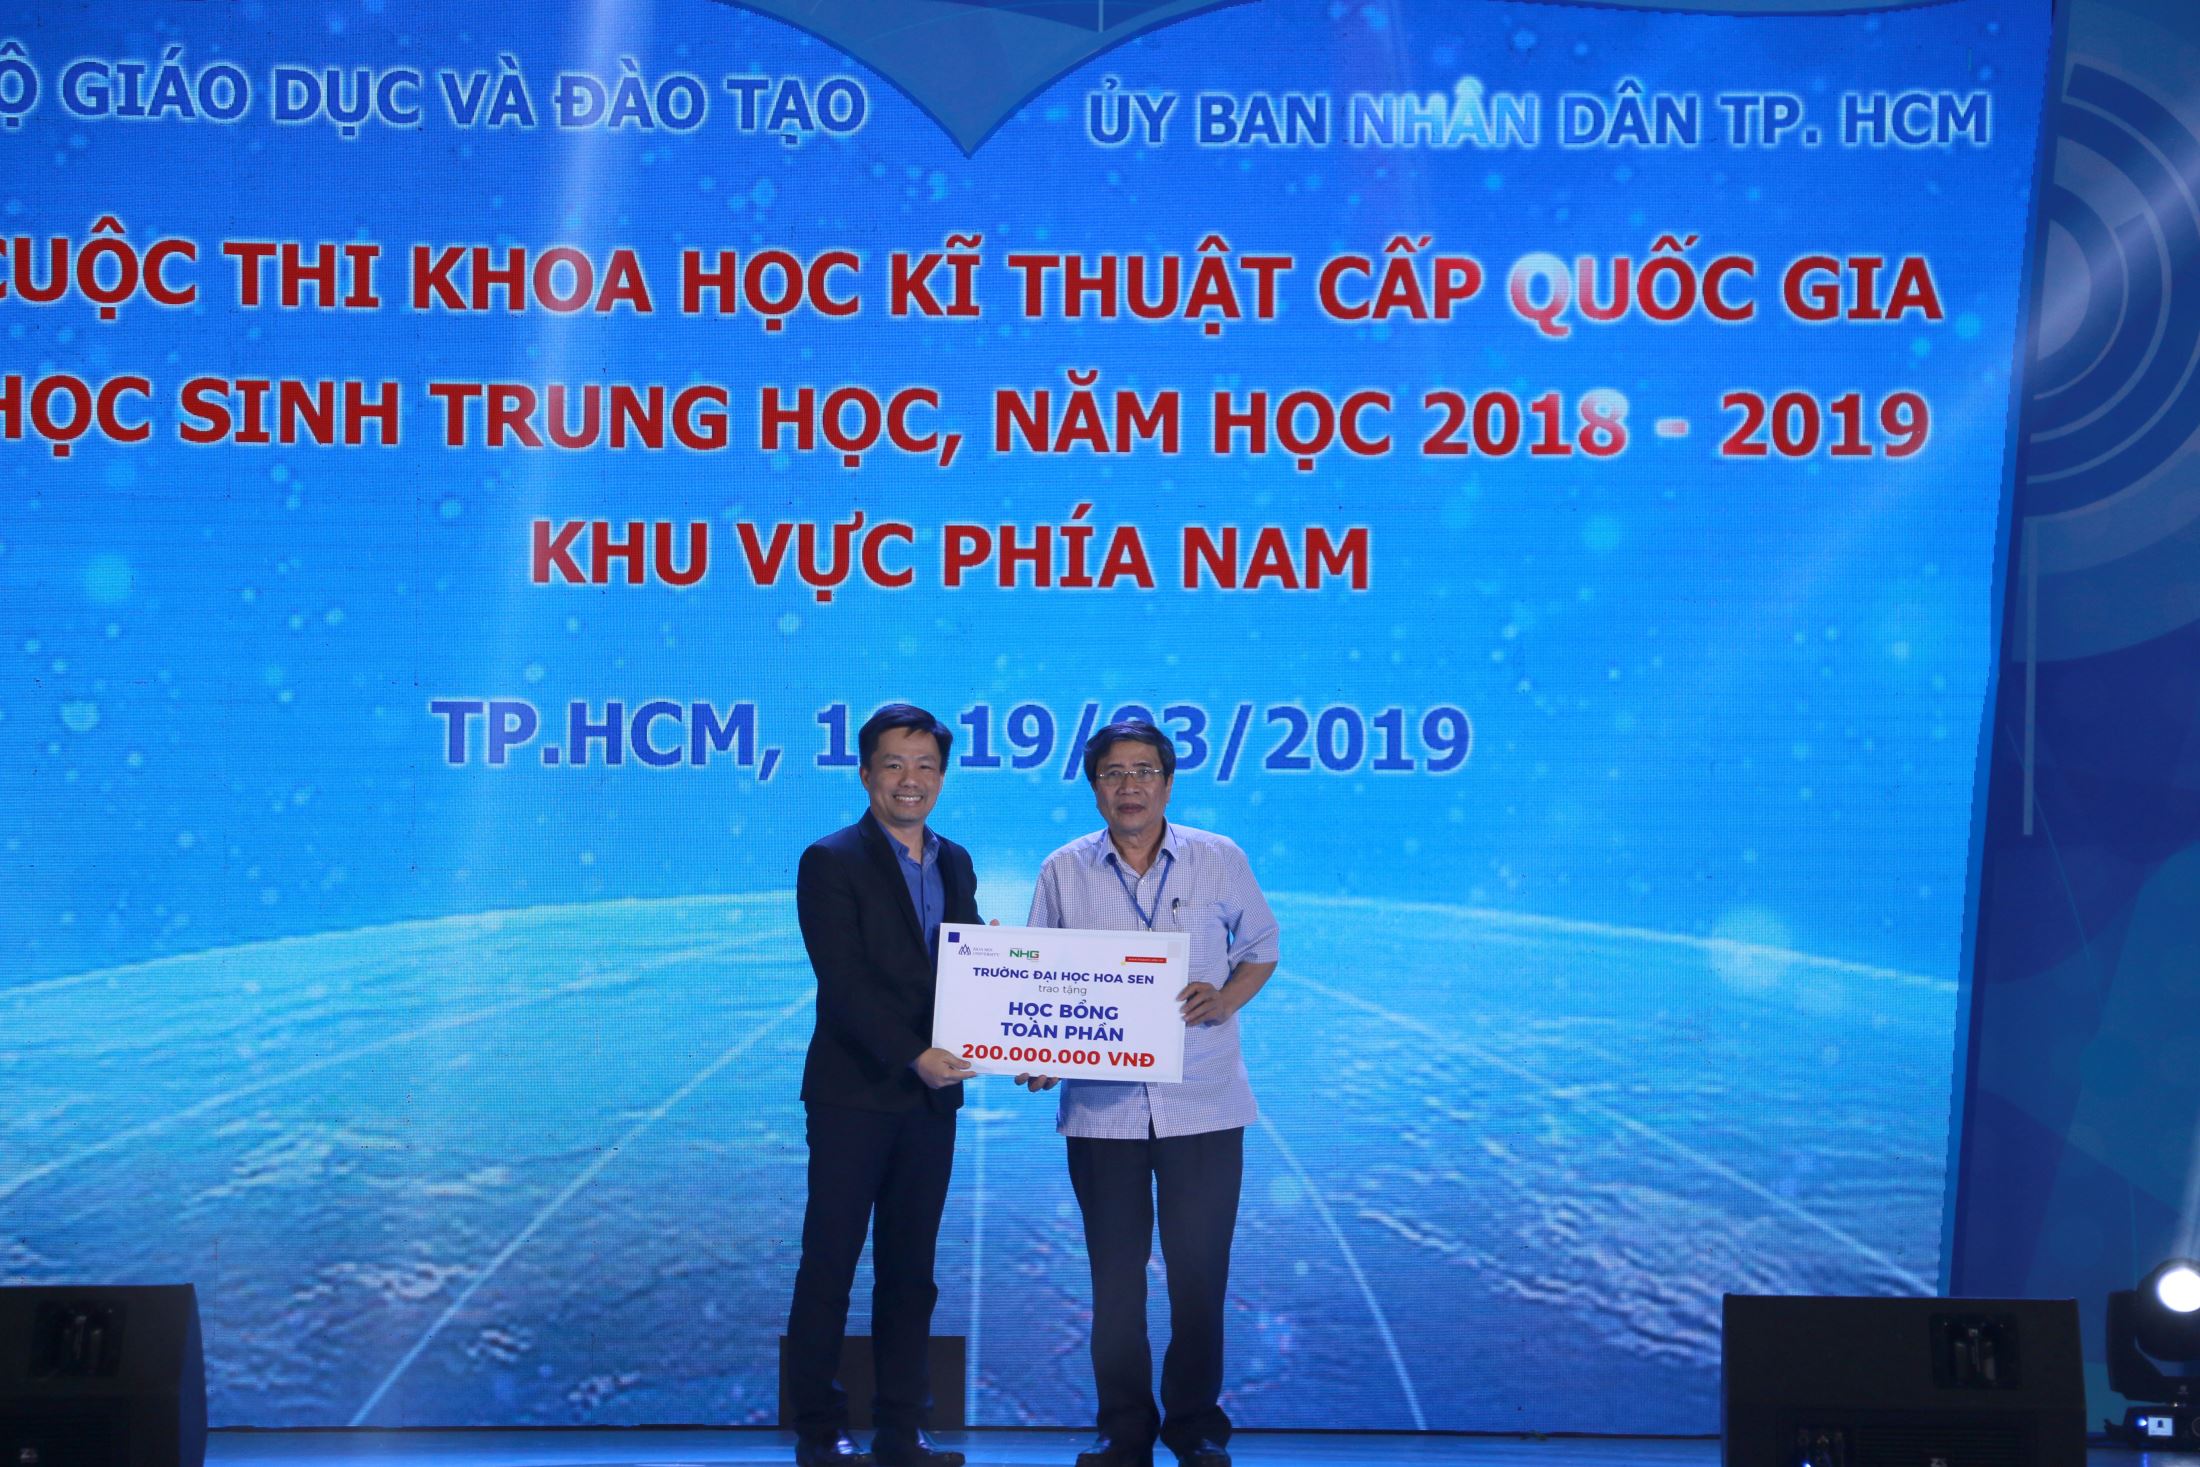 Dr. Vu Tuong Thuy - Vice president of Hoa Sen University awarding scholarships at the competition.